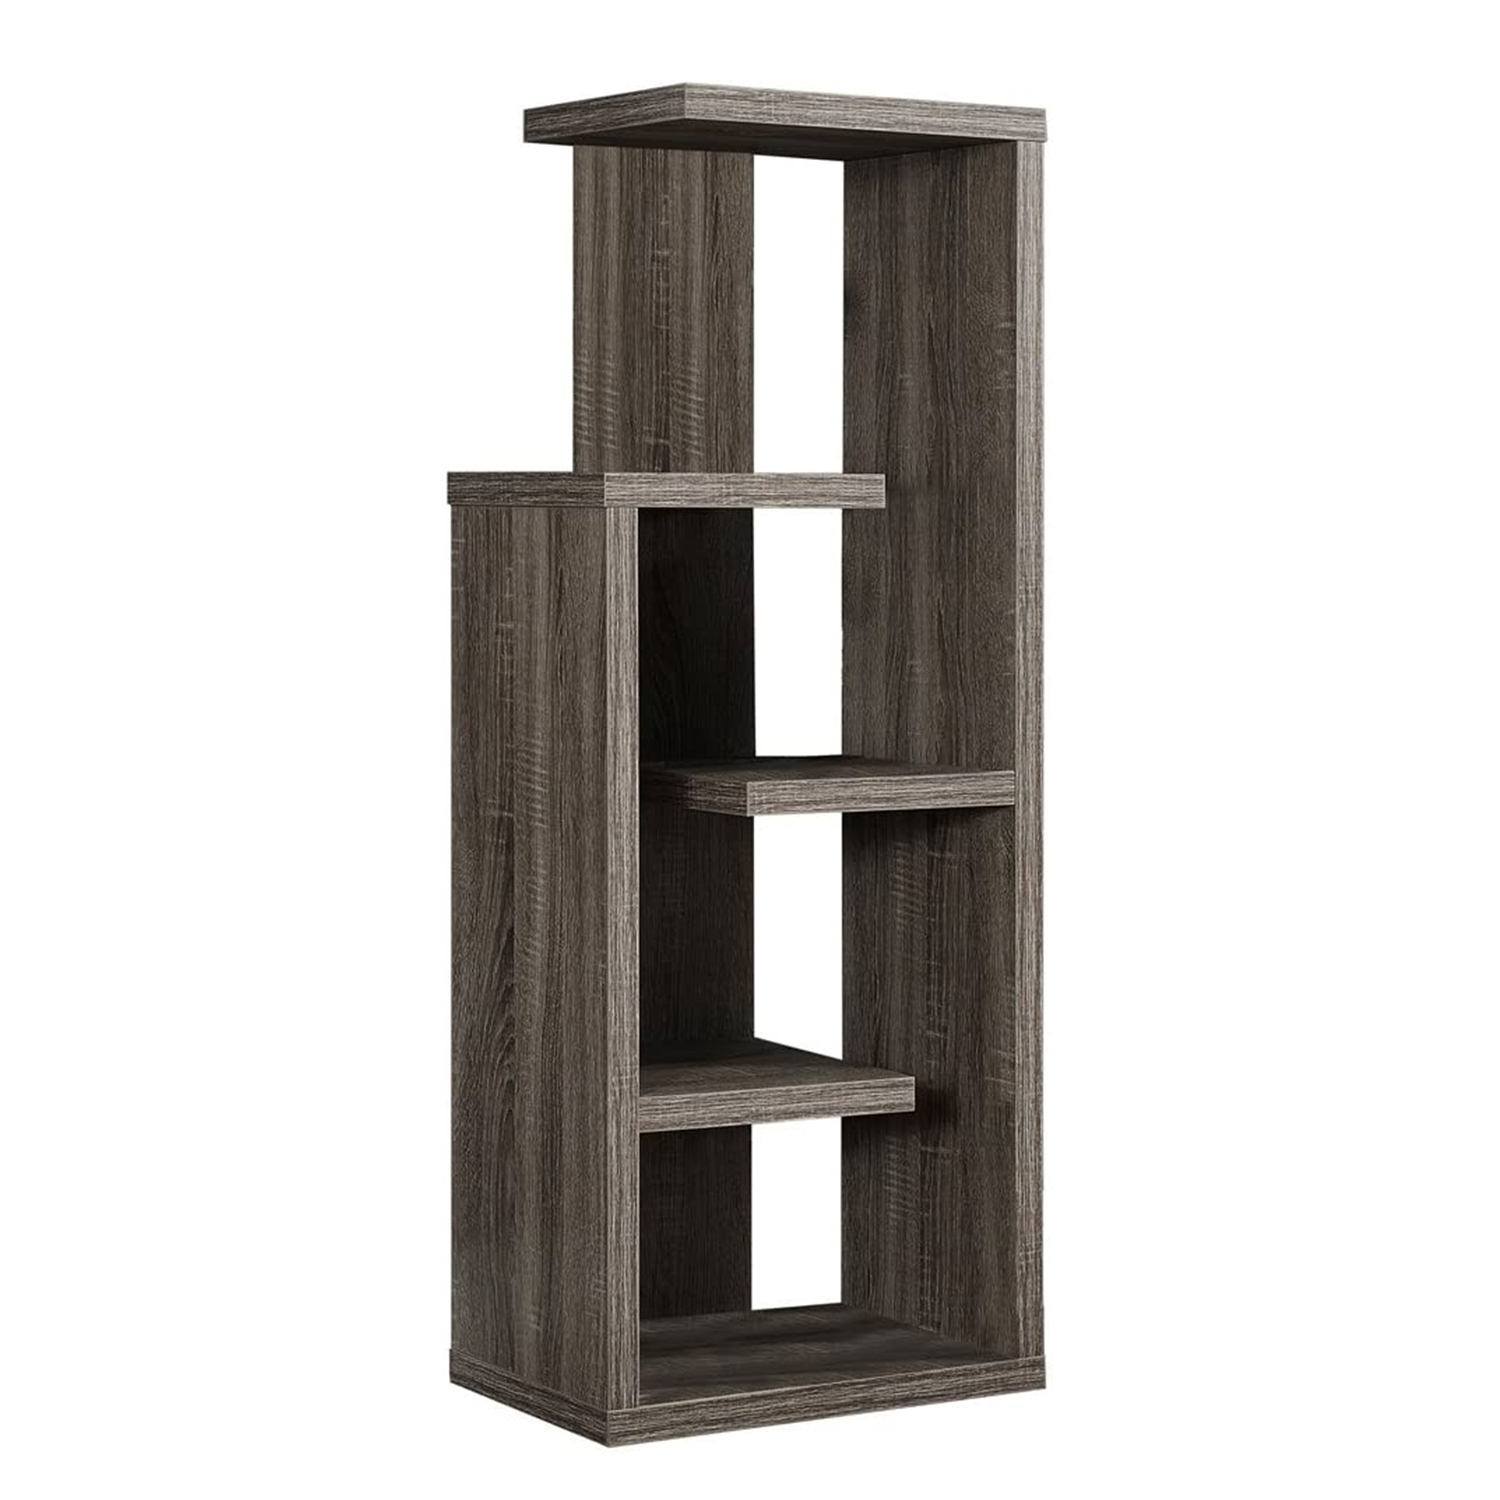 12" x 18.5" x 47.25" Dark Taupe Particle Board Hollow Core Bookcase